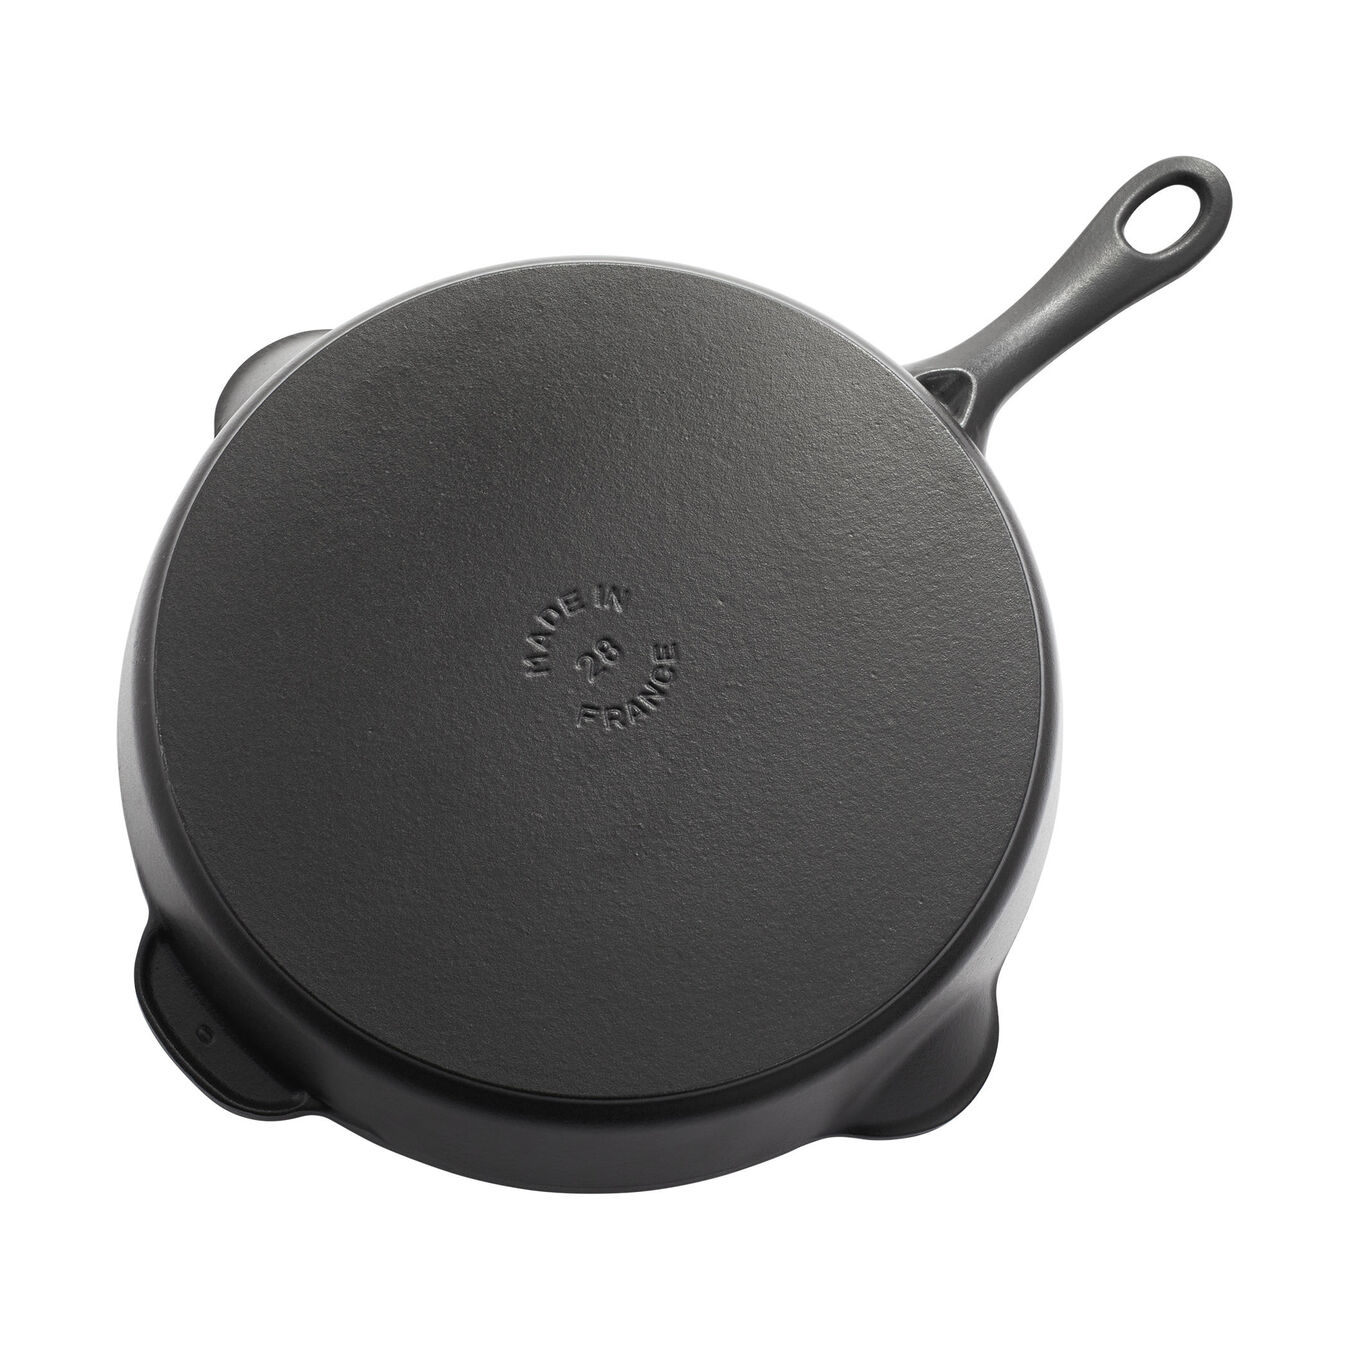 28 cm / 11 inch cast iron Frying pan, black - Visual Imperfections,,large 4